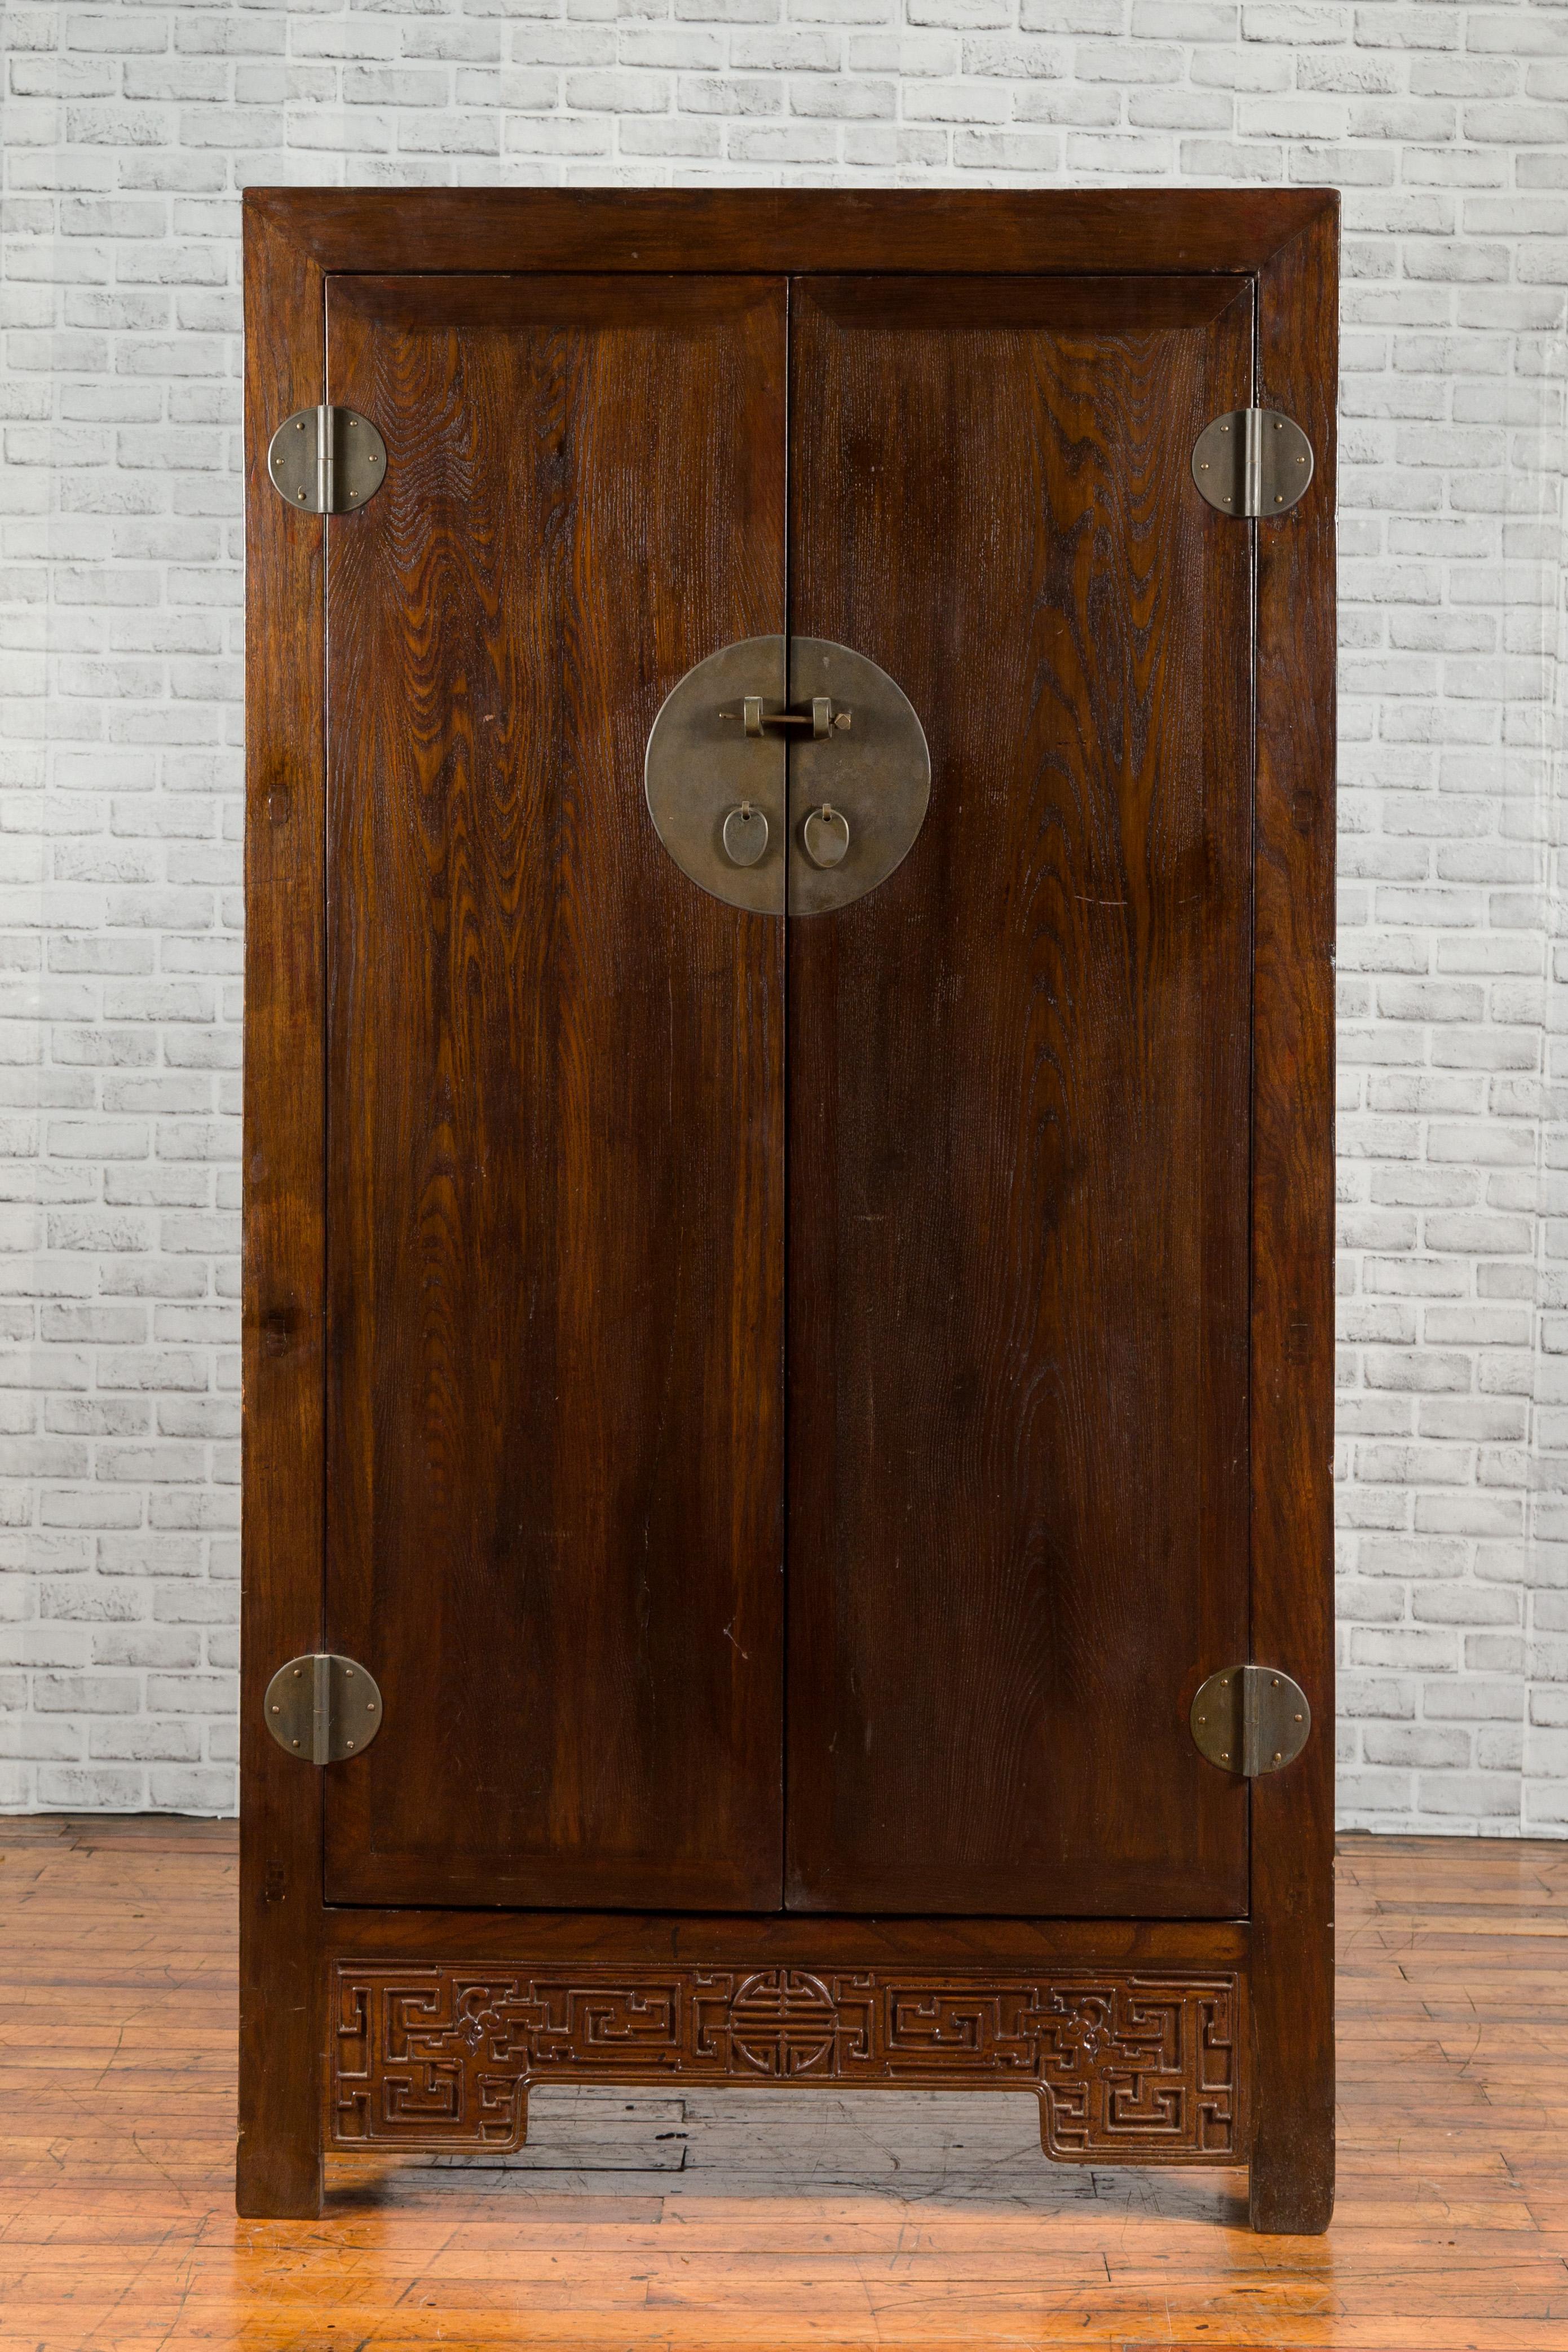 A Chinese Qing Dynasty period large cabinet from the 19th century, with carved apron and hidden drawers. Created in China during the Qing Dynasty period, this large brown cabinet features a linear silhouette perfectly complimented by the dark brown